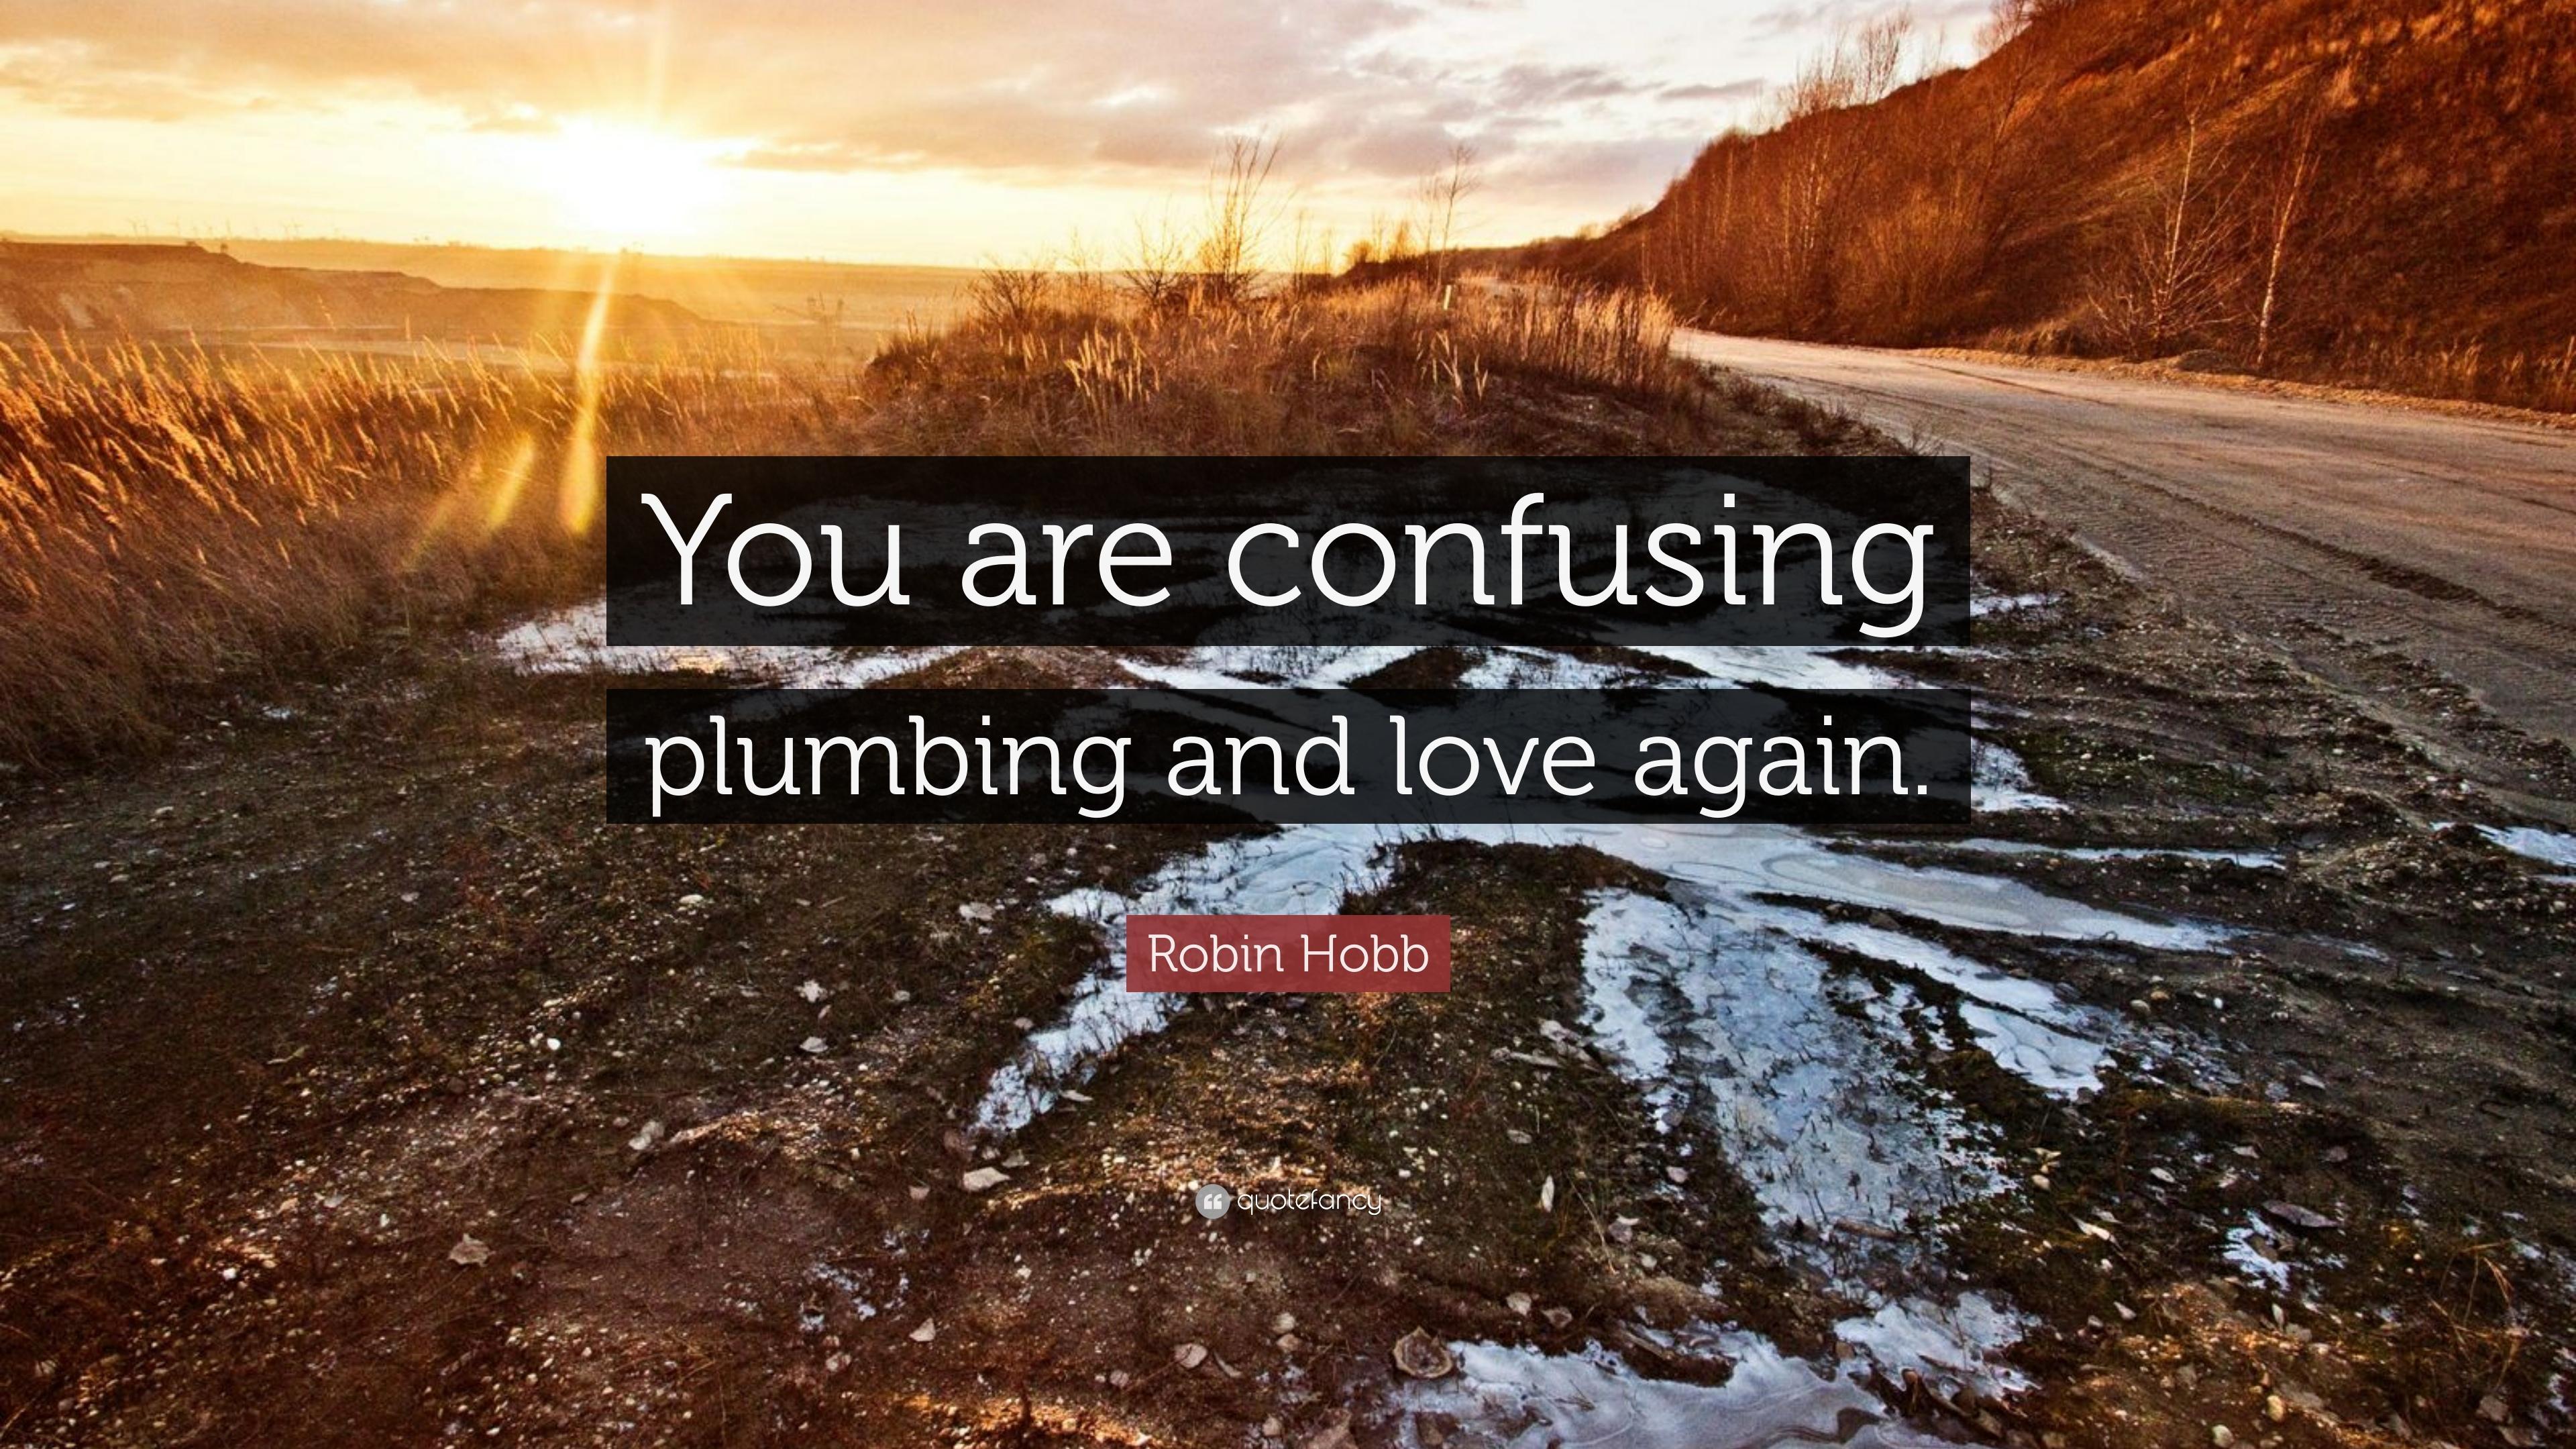 Robin Hobb Quote: “You are confusing plumbing and love again